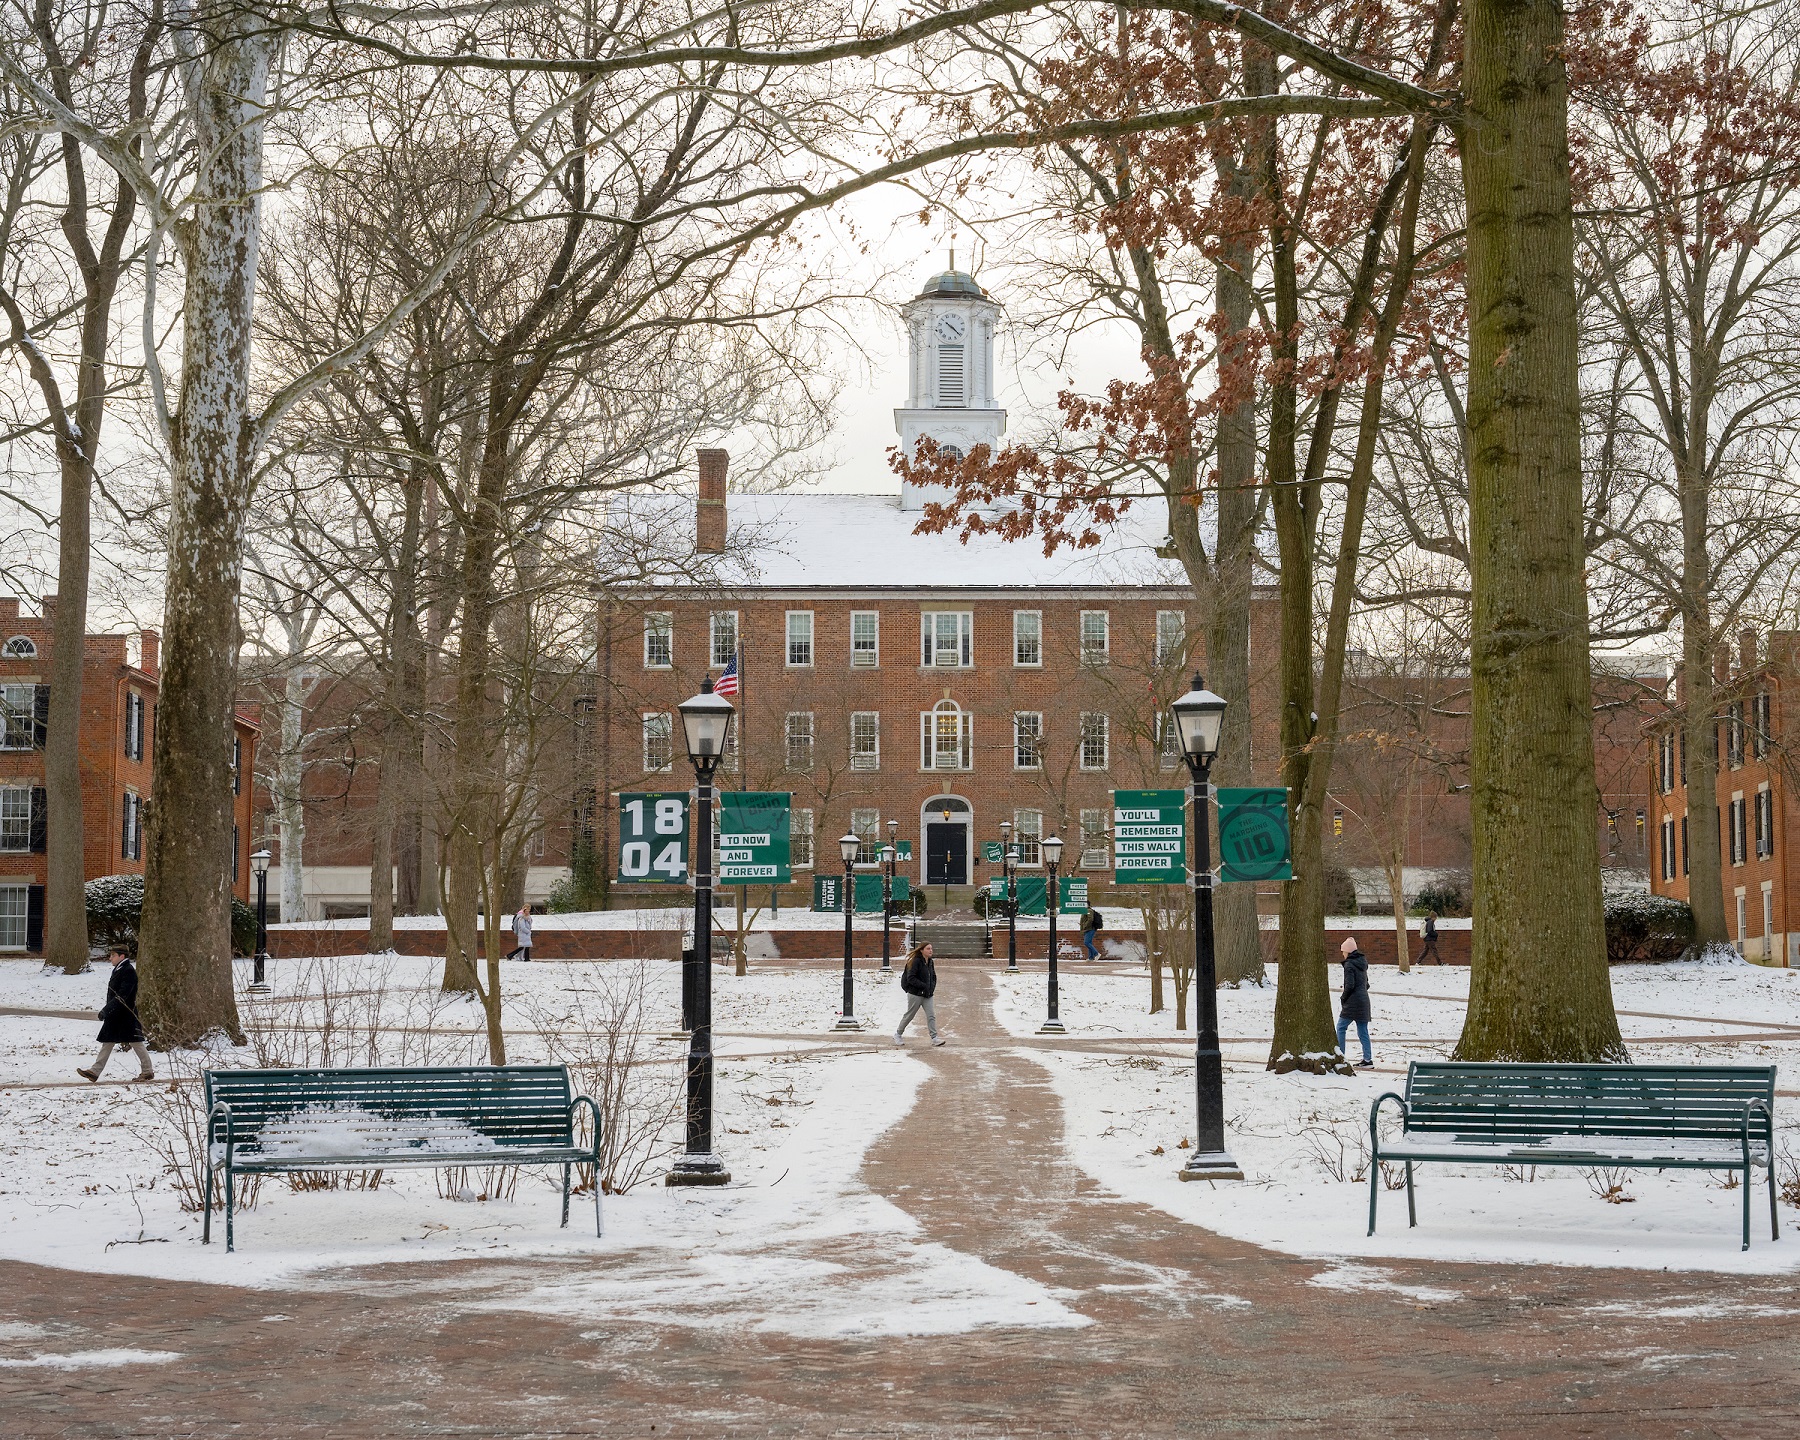 The College Green is shown on a snowy, winter day